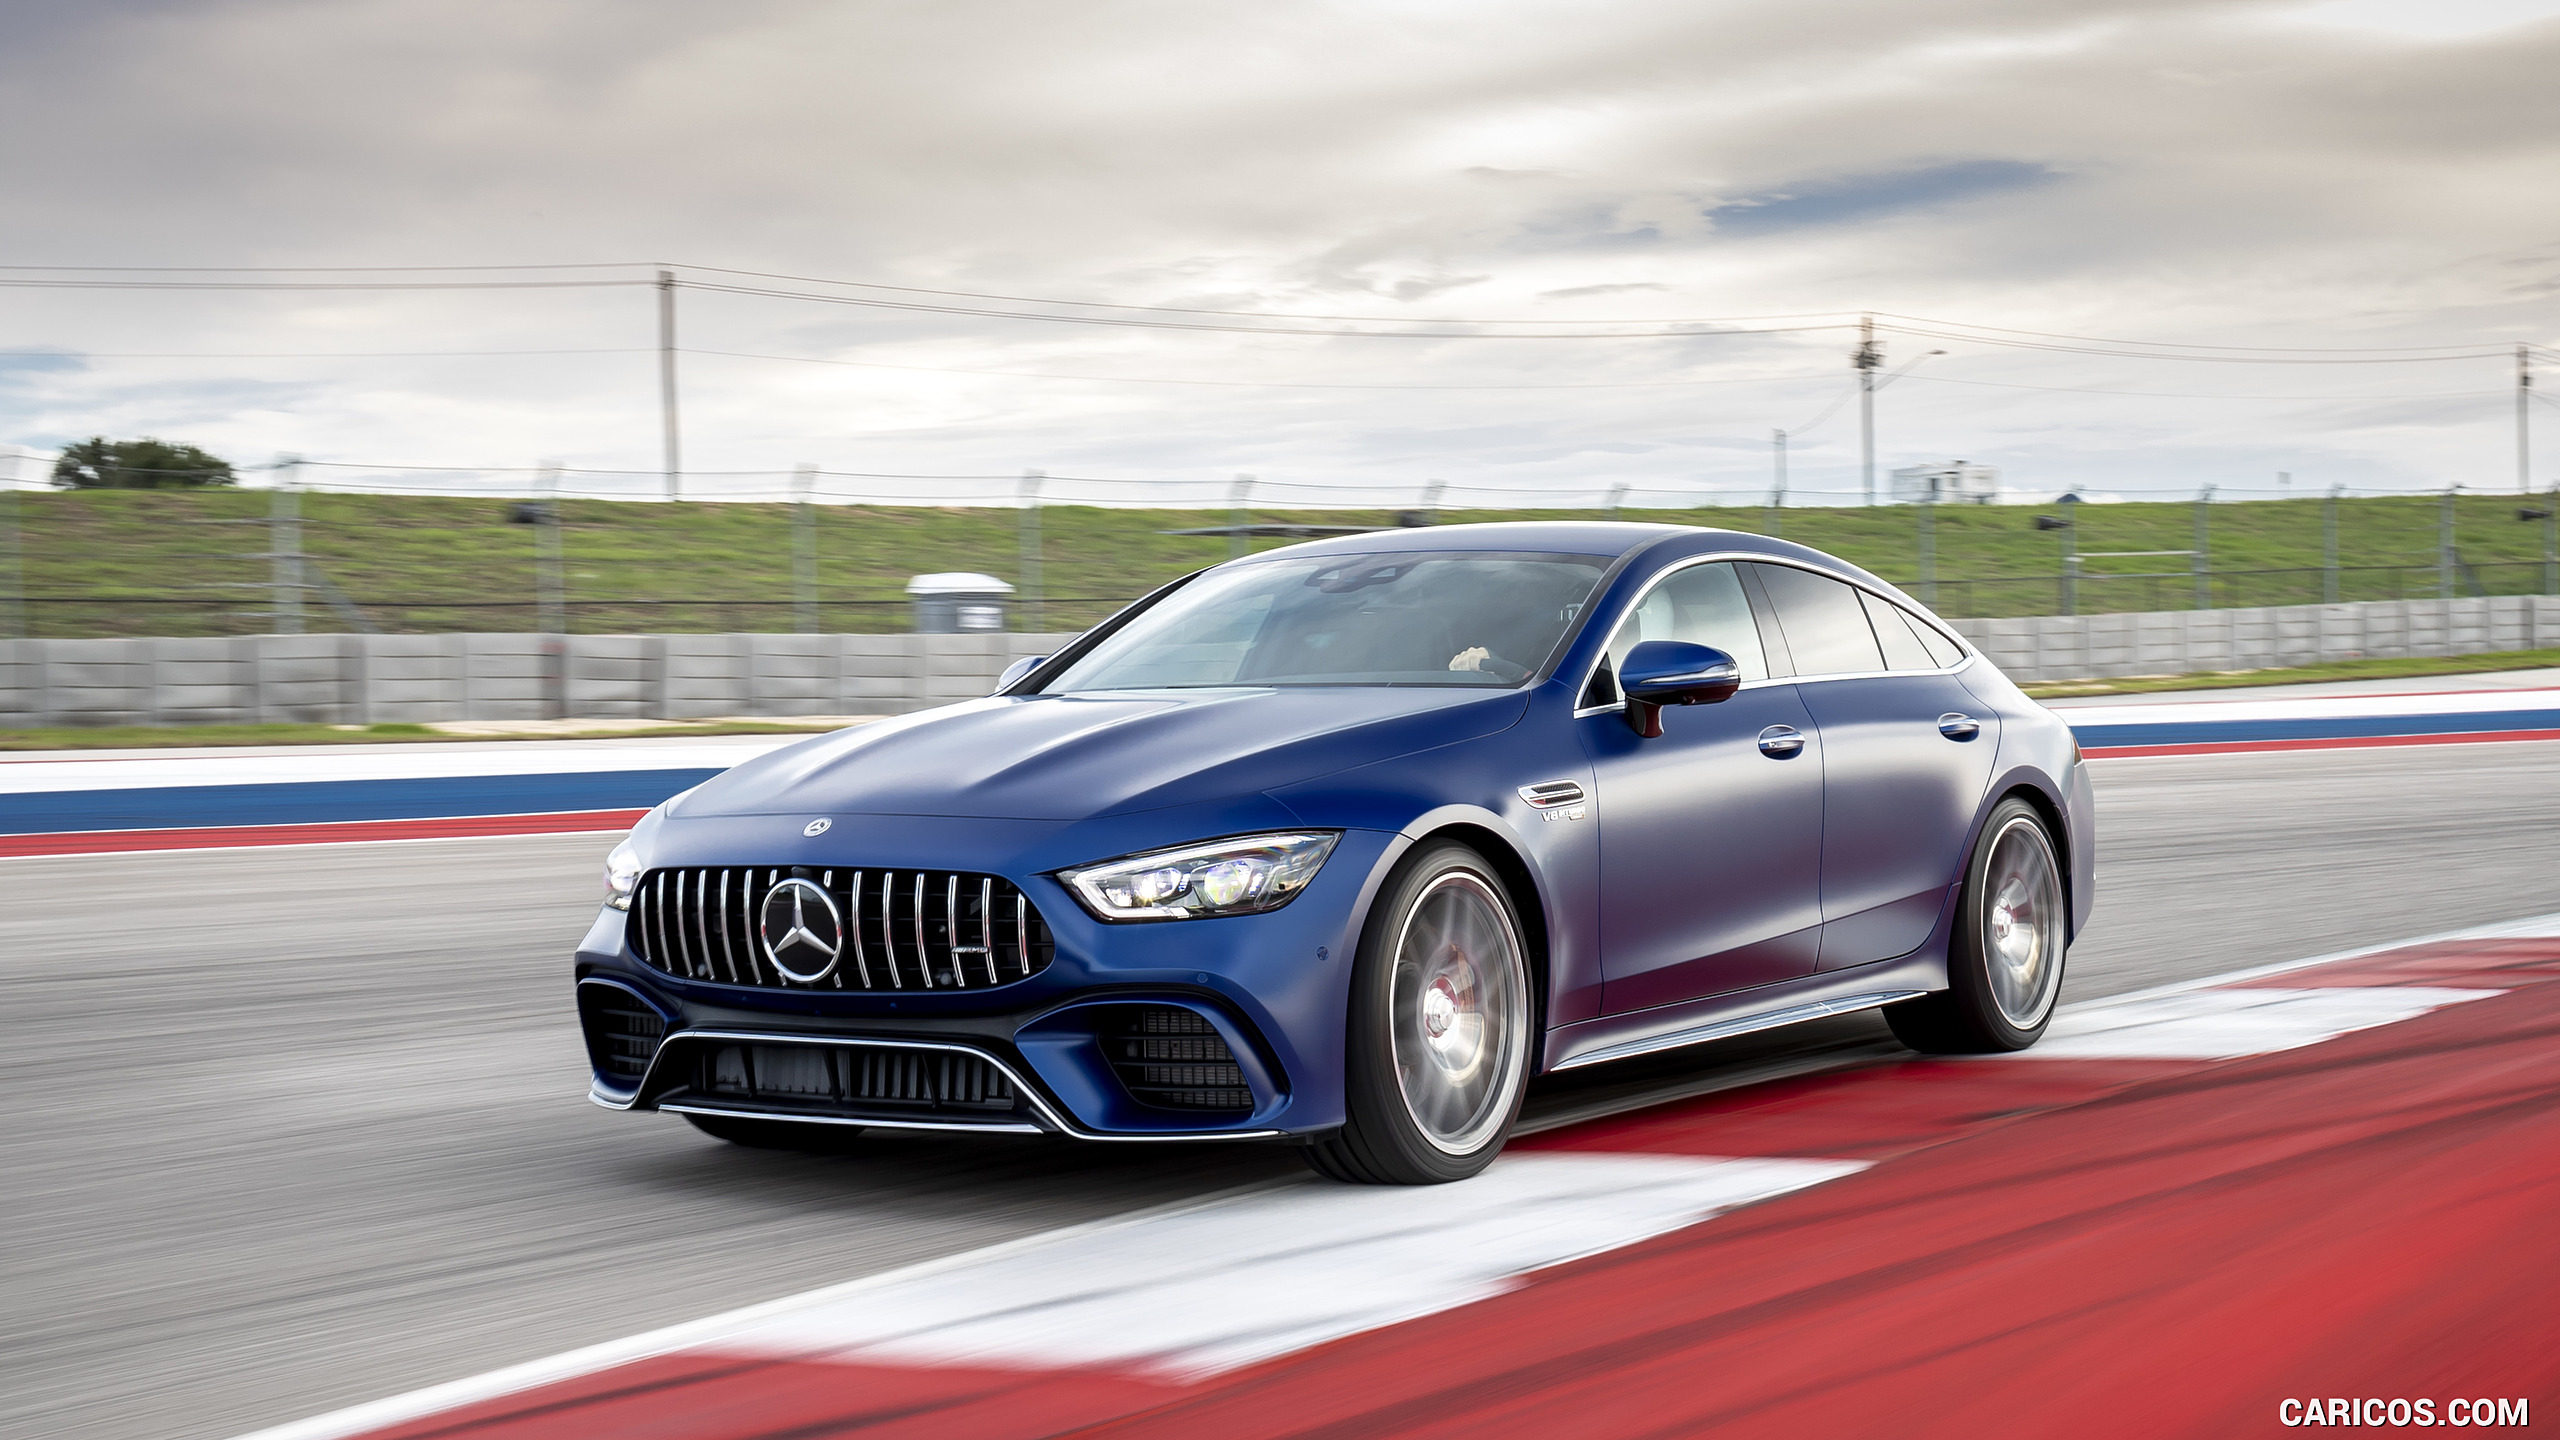 2019 Mercedes-AMG GT 63 S 4MATIC+ 4-Door Coupe - Front Three-Quarter, #97 of 427